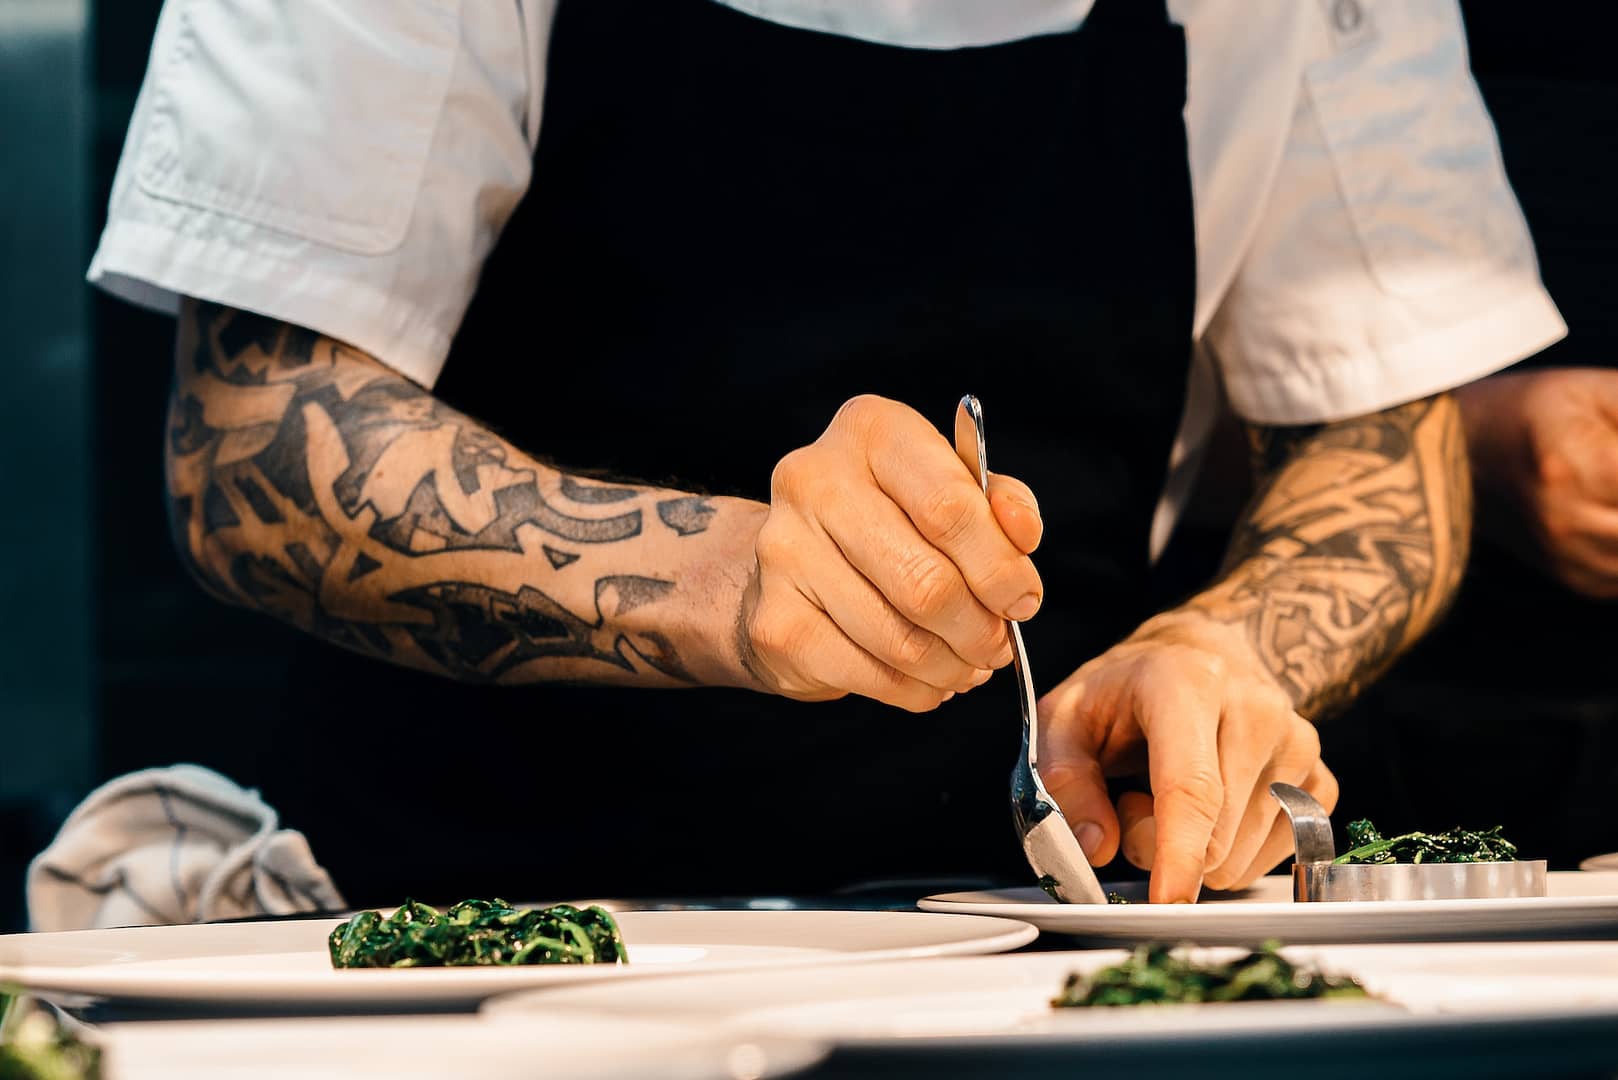 A chef plating up food